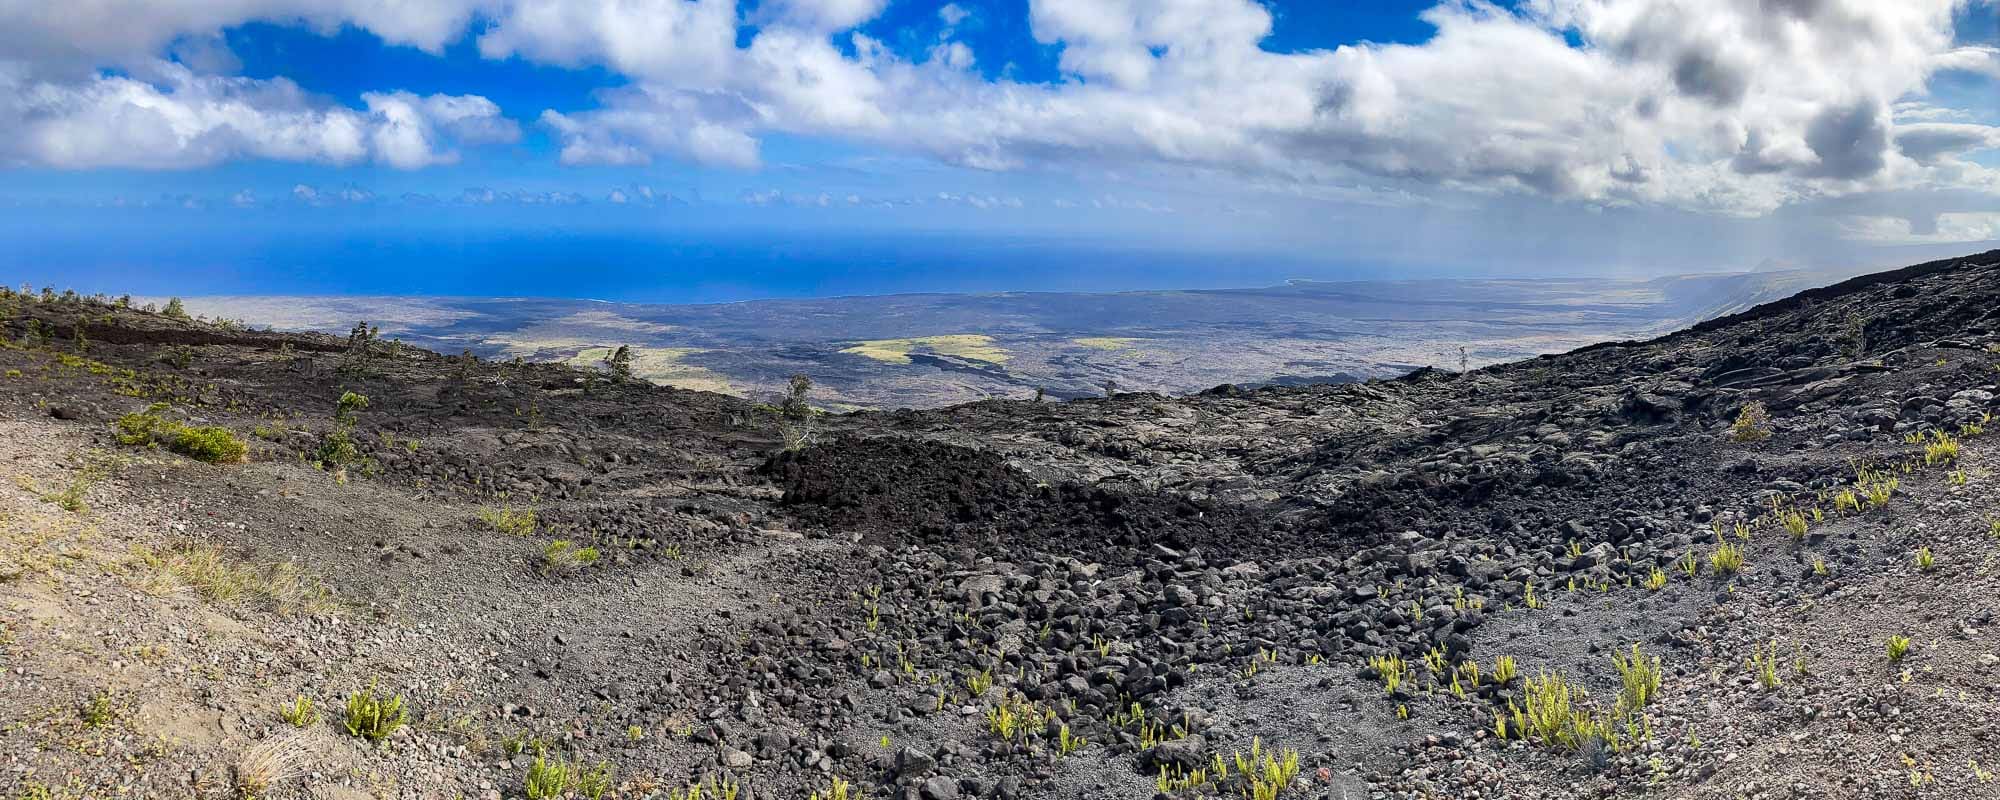 Panoramic view on the Chain of Craters Road in Hawai‘i Volcanoes National Park, Hawaii